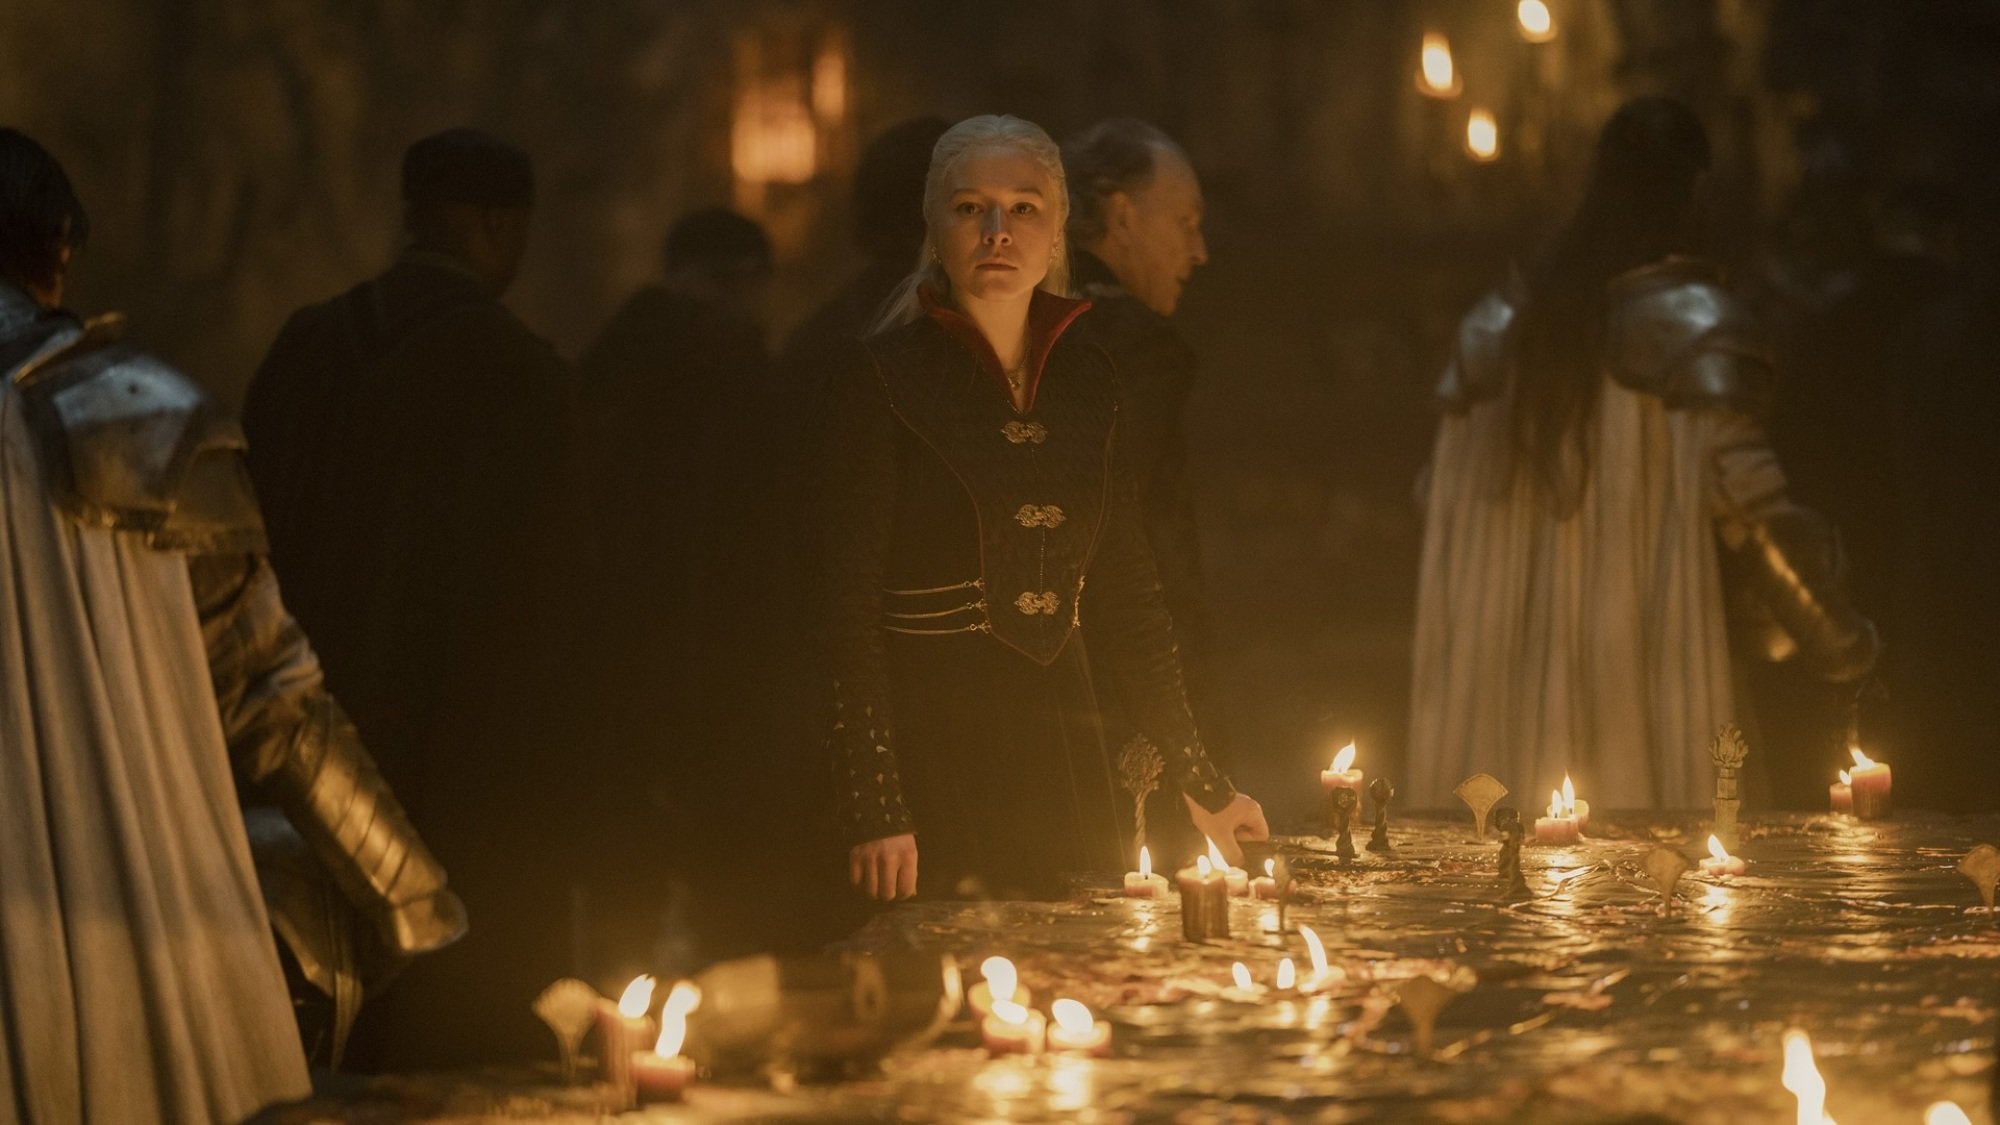 A woman with silver blonde hair in a black cloak stands at a war table covered in candles. Knights swarm behind her.